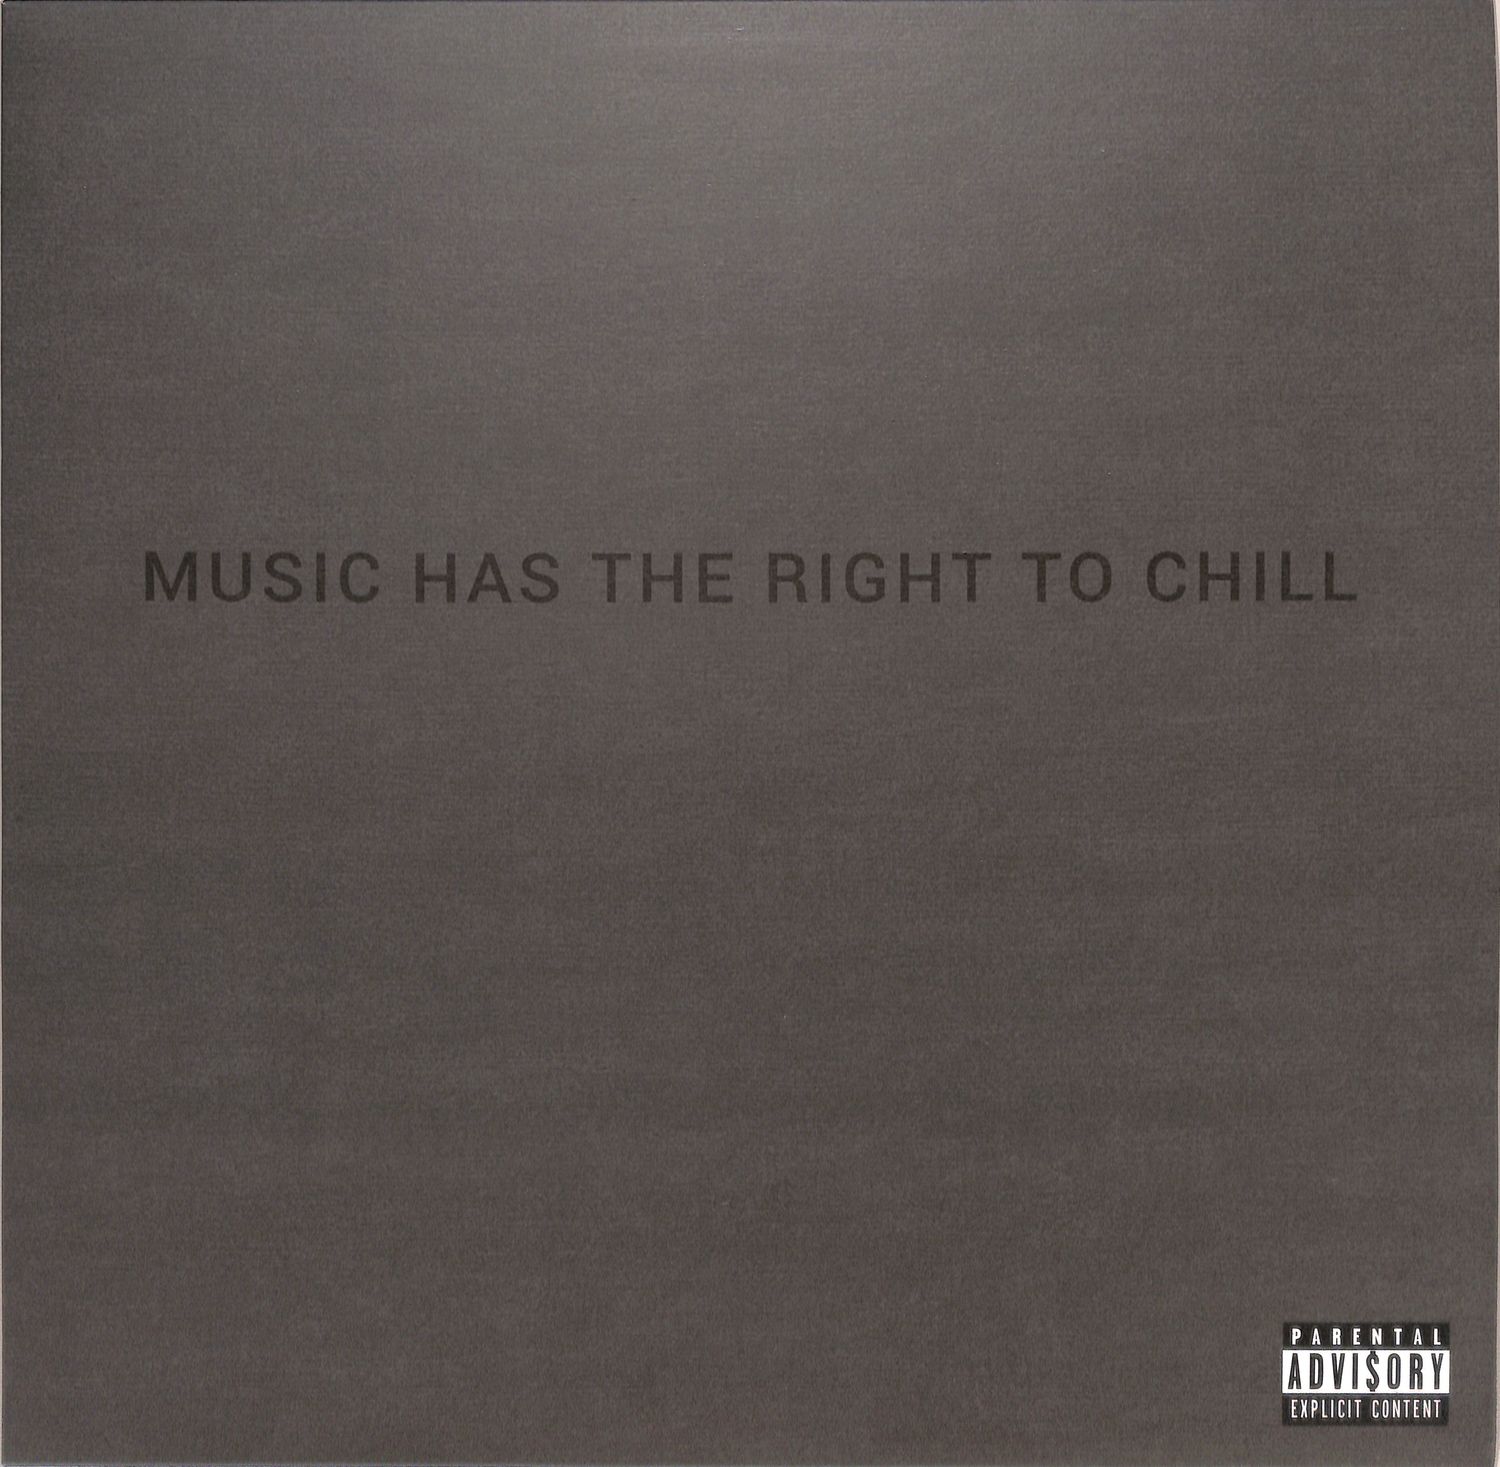 MHTRTC - MUSIC HAS THE RIGHT TO CHILL